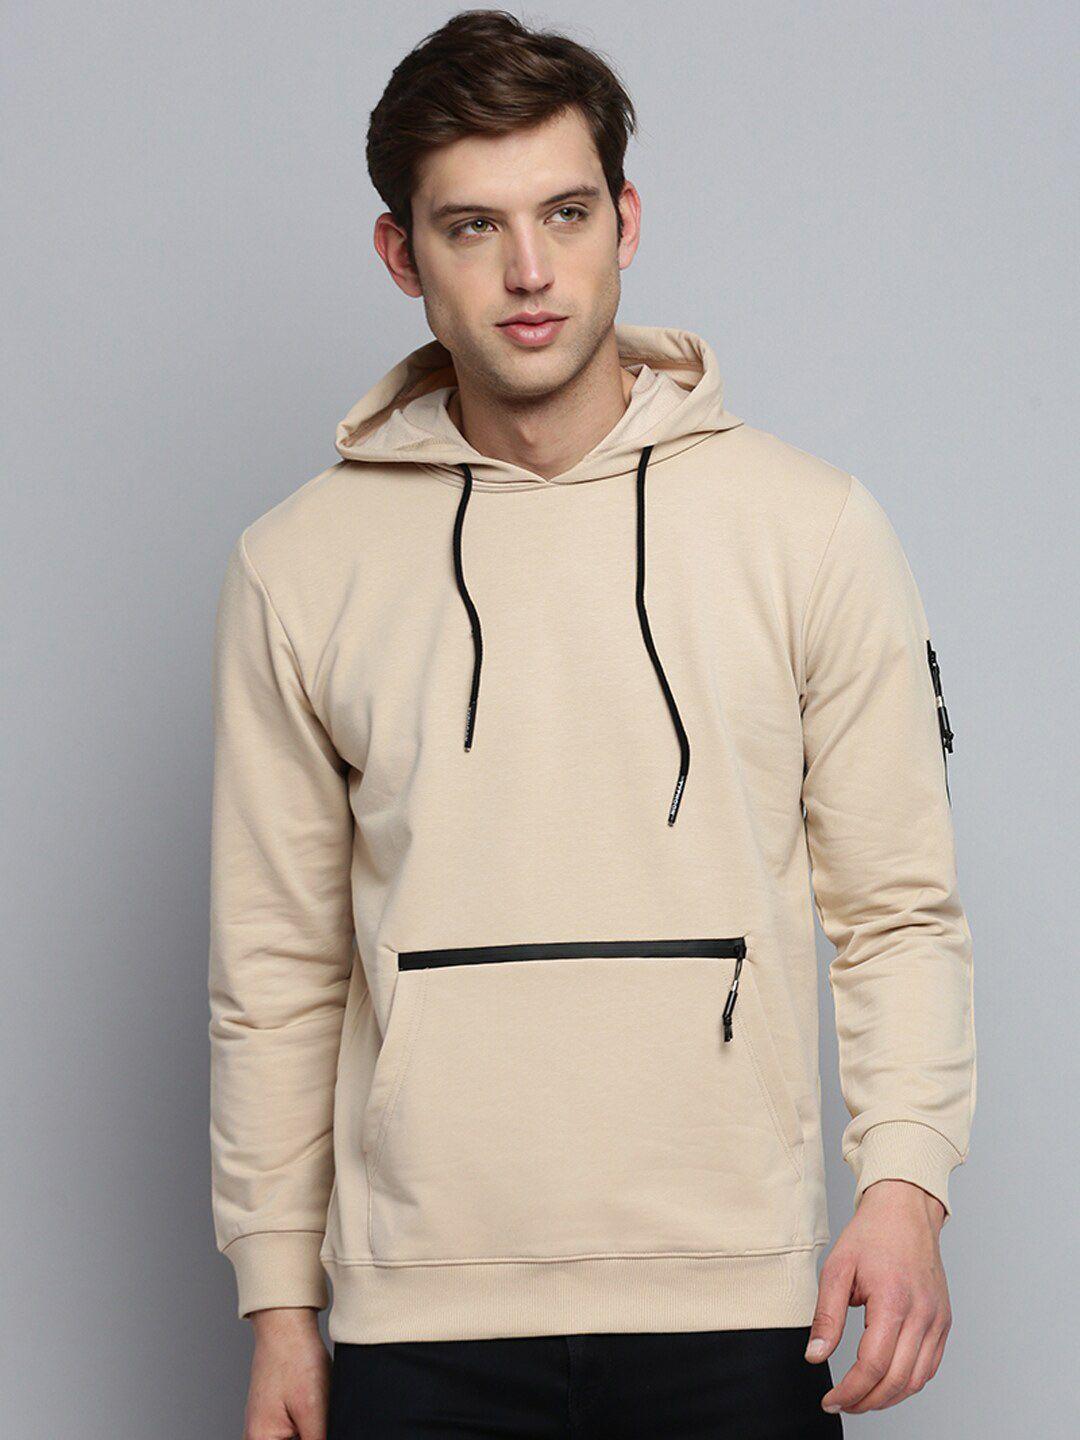 showoff hooded pullover cotton sweatshirt